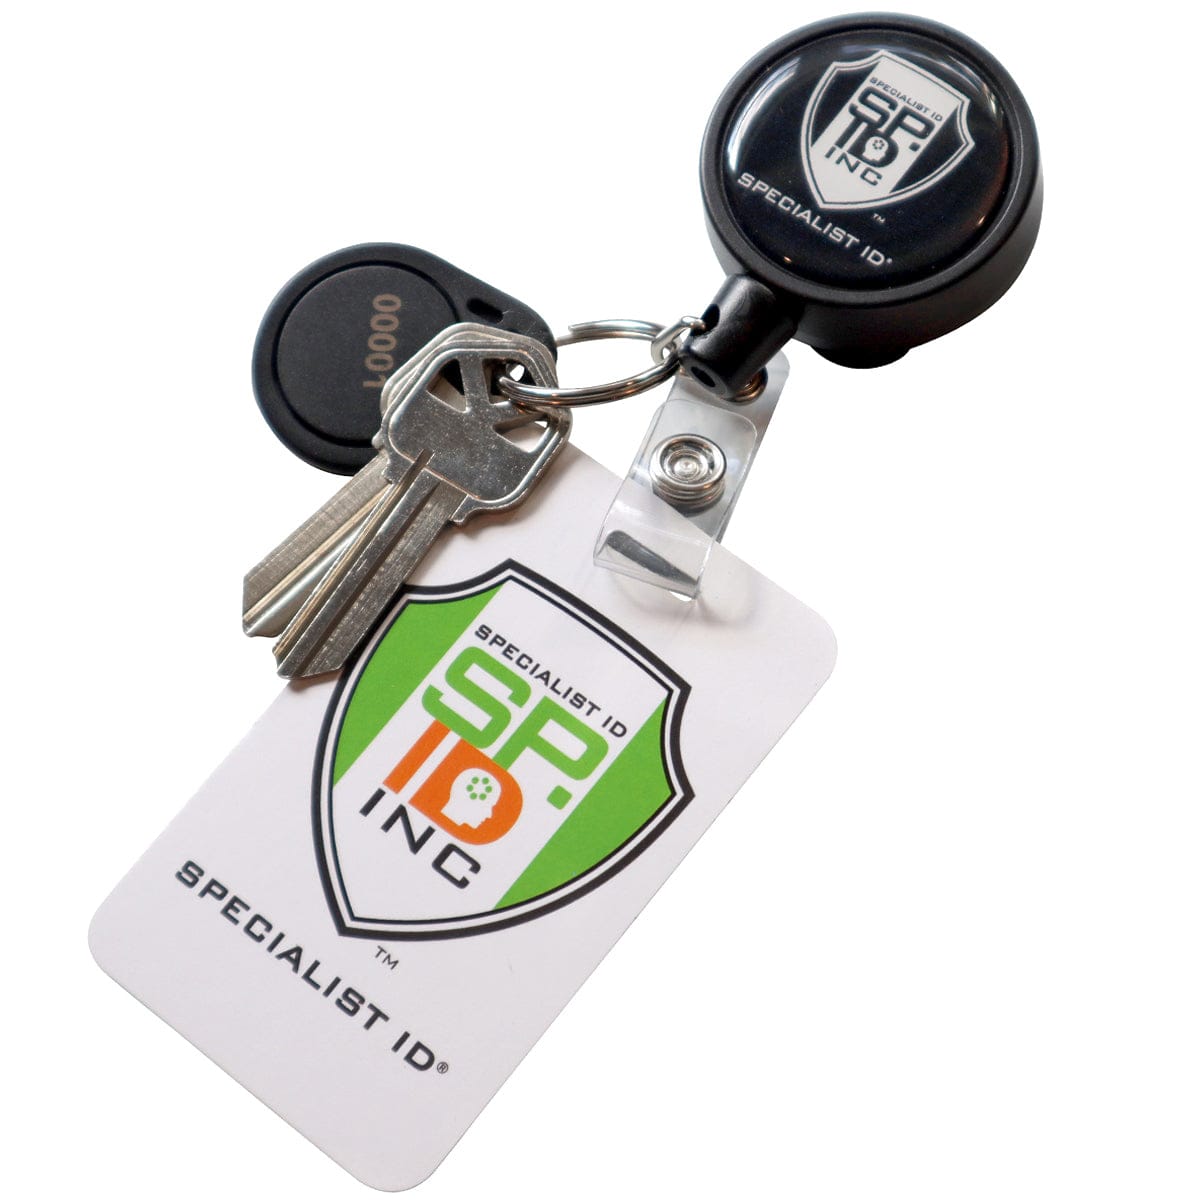 Heavy Duty Badge Reel With Belt Clip & Key Ring at